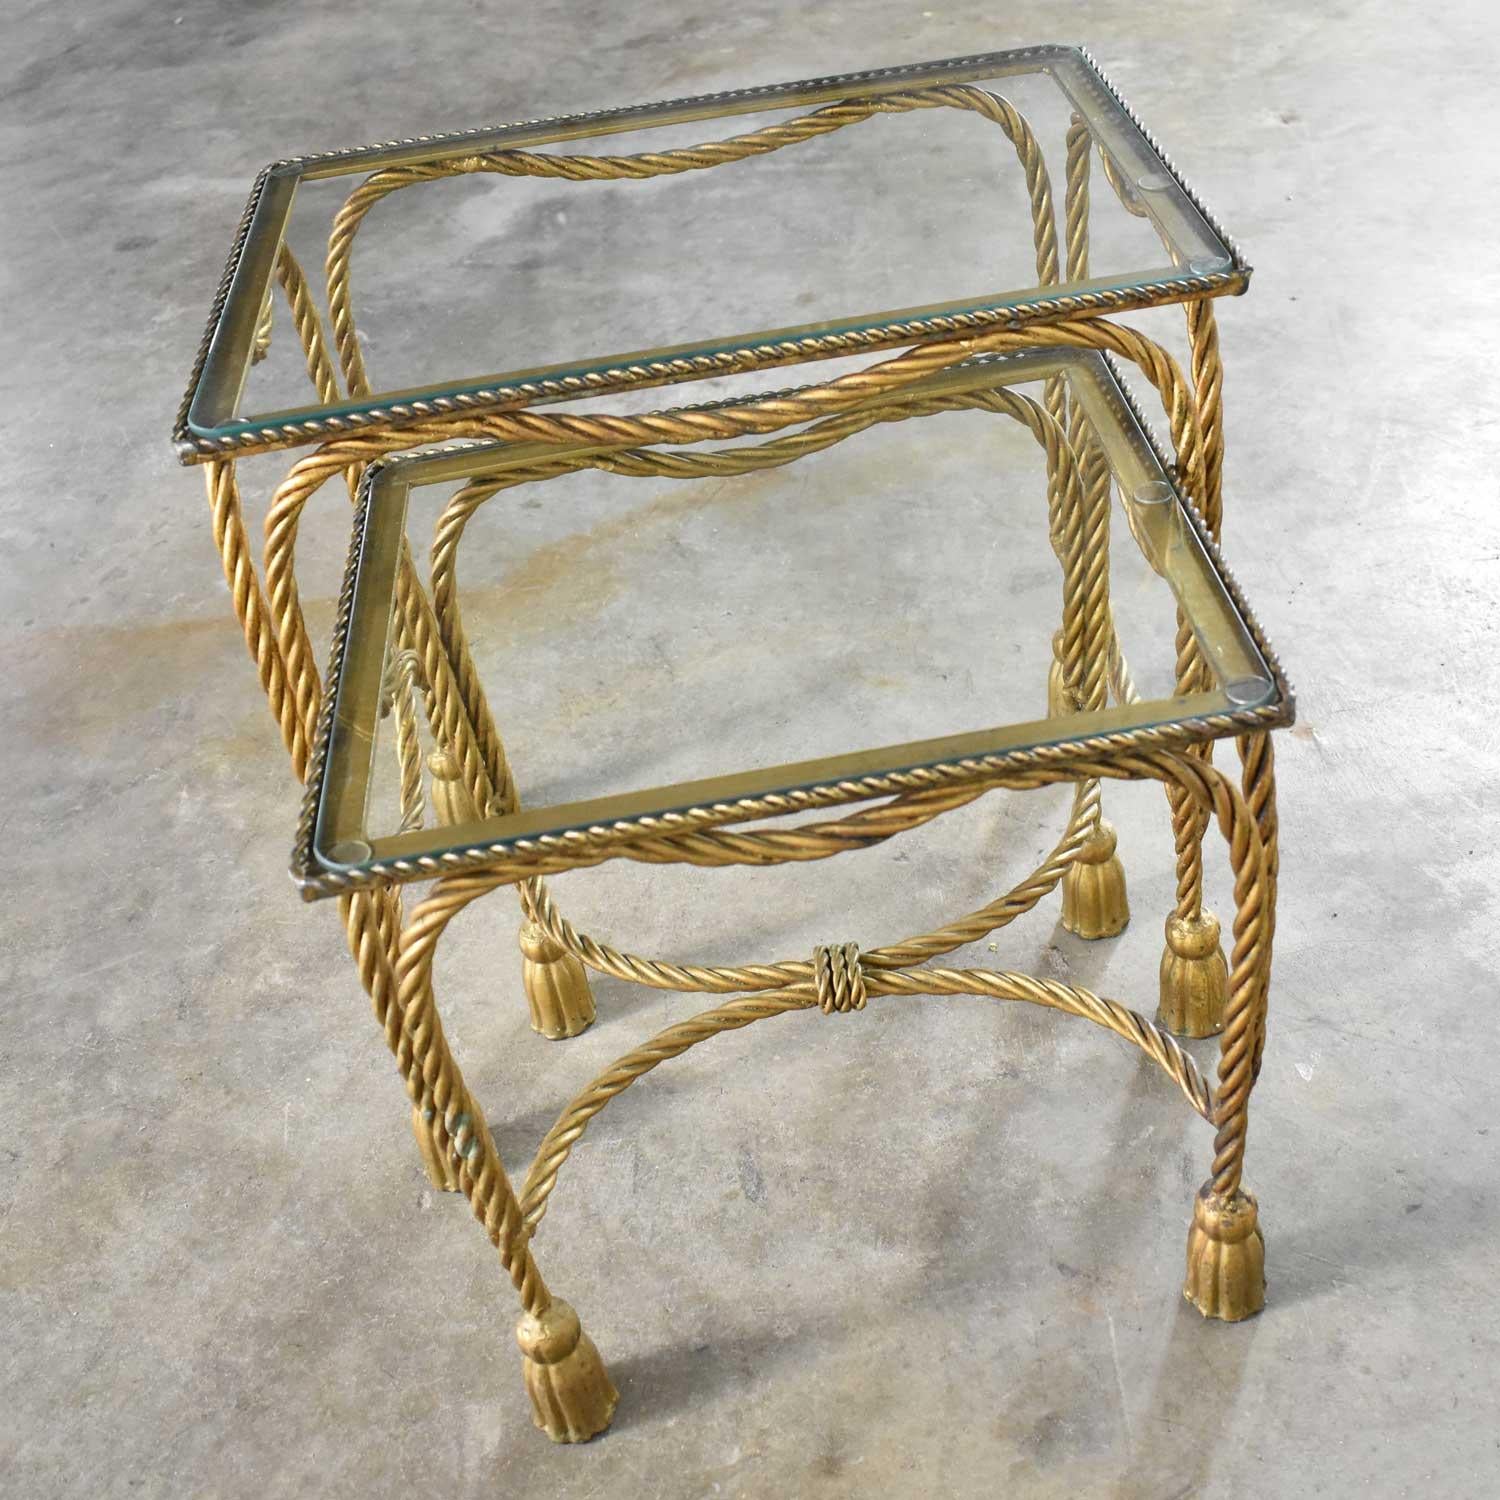 Beautiful set of two Hollywood Regency gilt rope and tassel nesting tables with glass tops. They are in wonderful vintage condition with no outstanding flaws that we have seen. They do have normal wear for their age. The gilding has a nice age